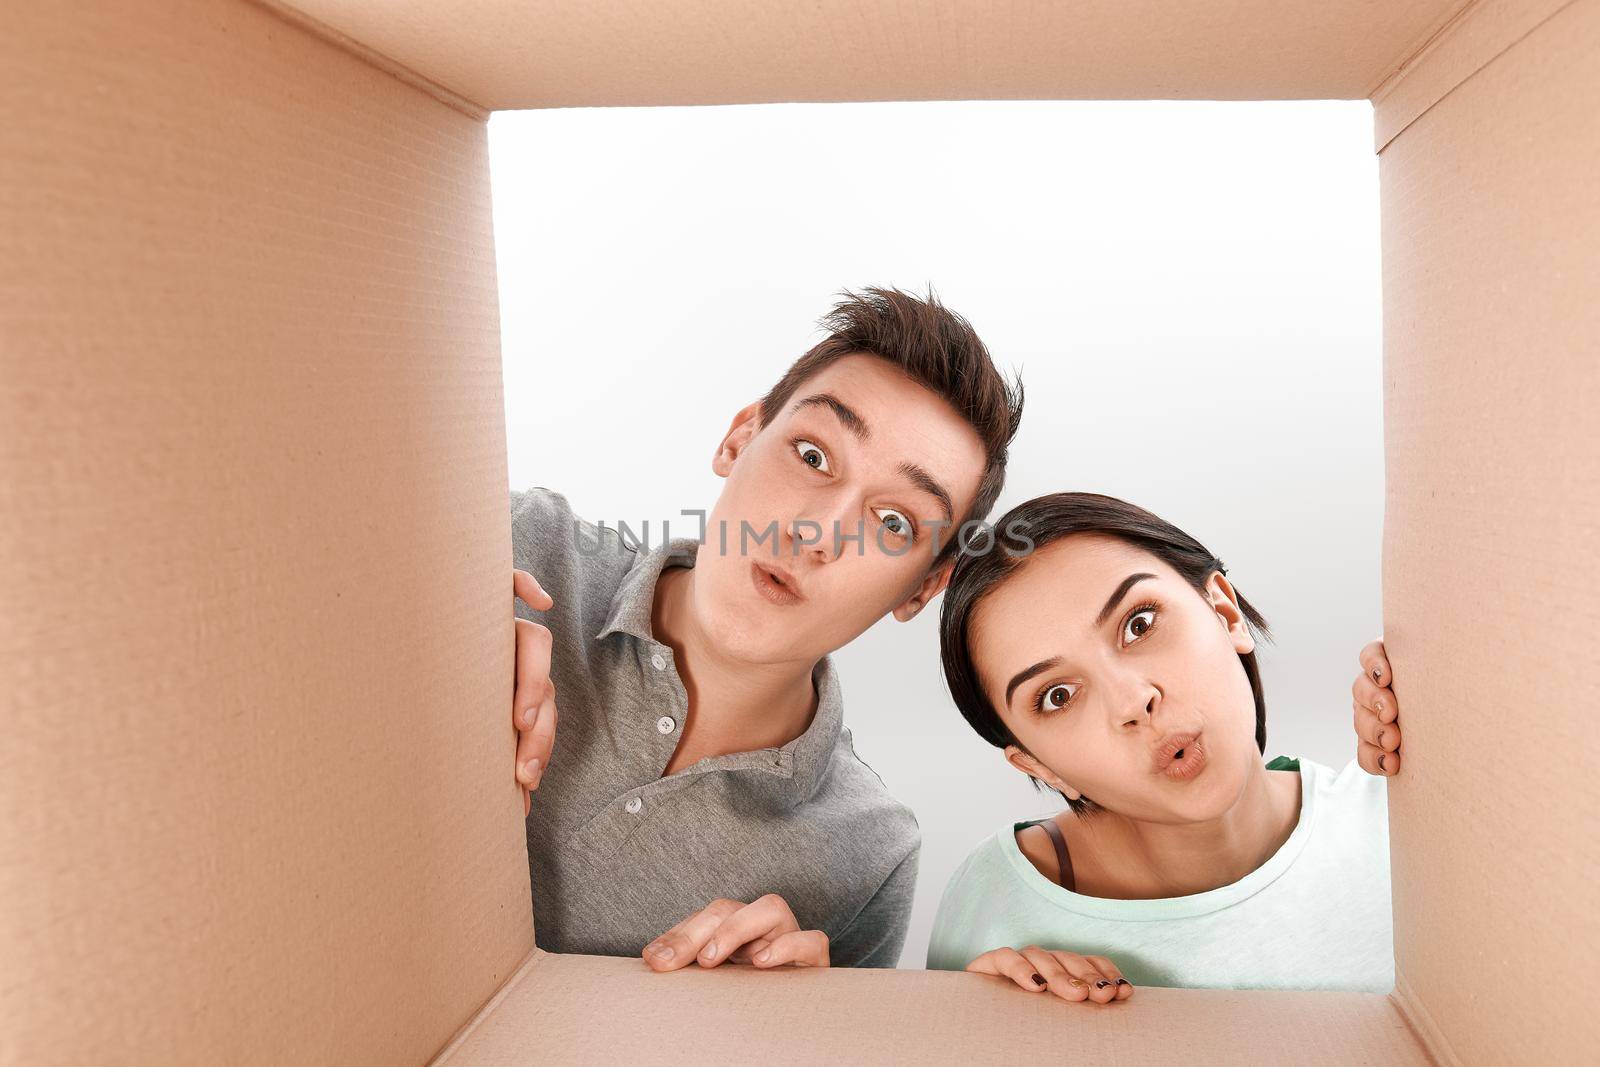 People want to know they matter. Surpised teens opening a carton box and looking inside, desired purchase concept by friendsstock